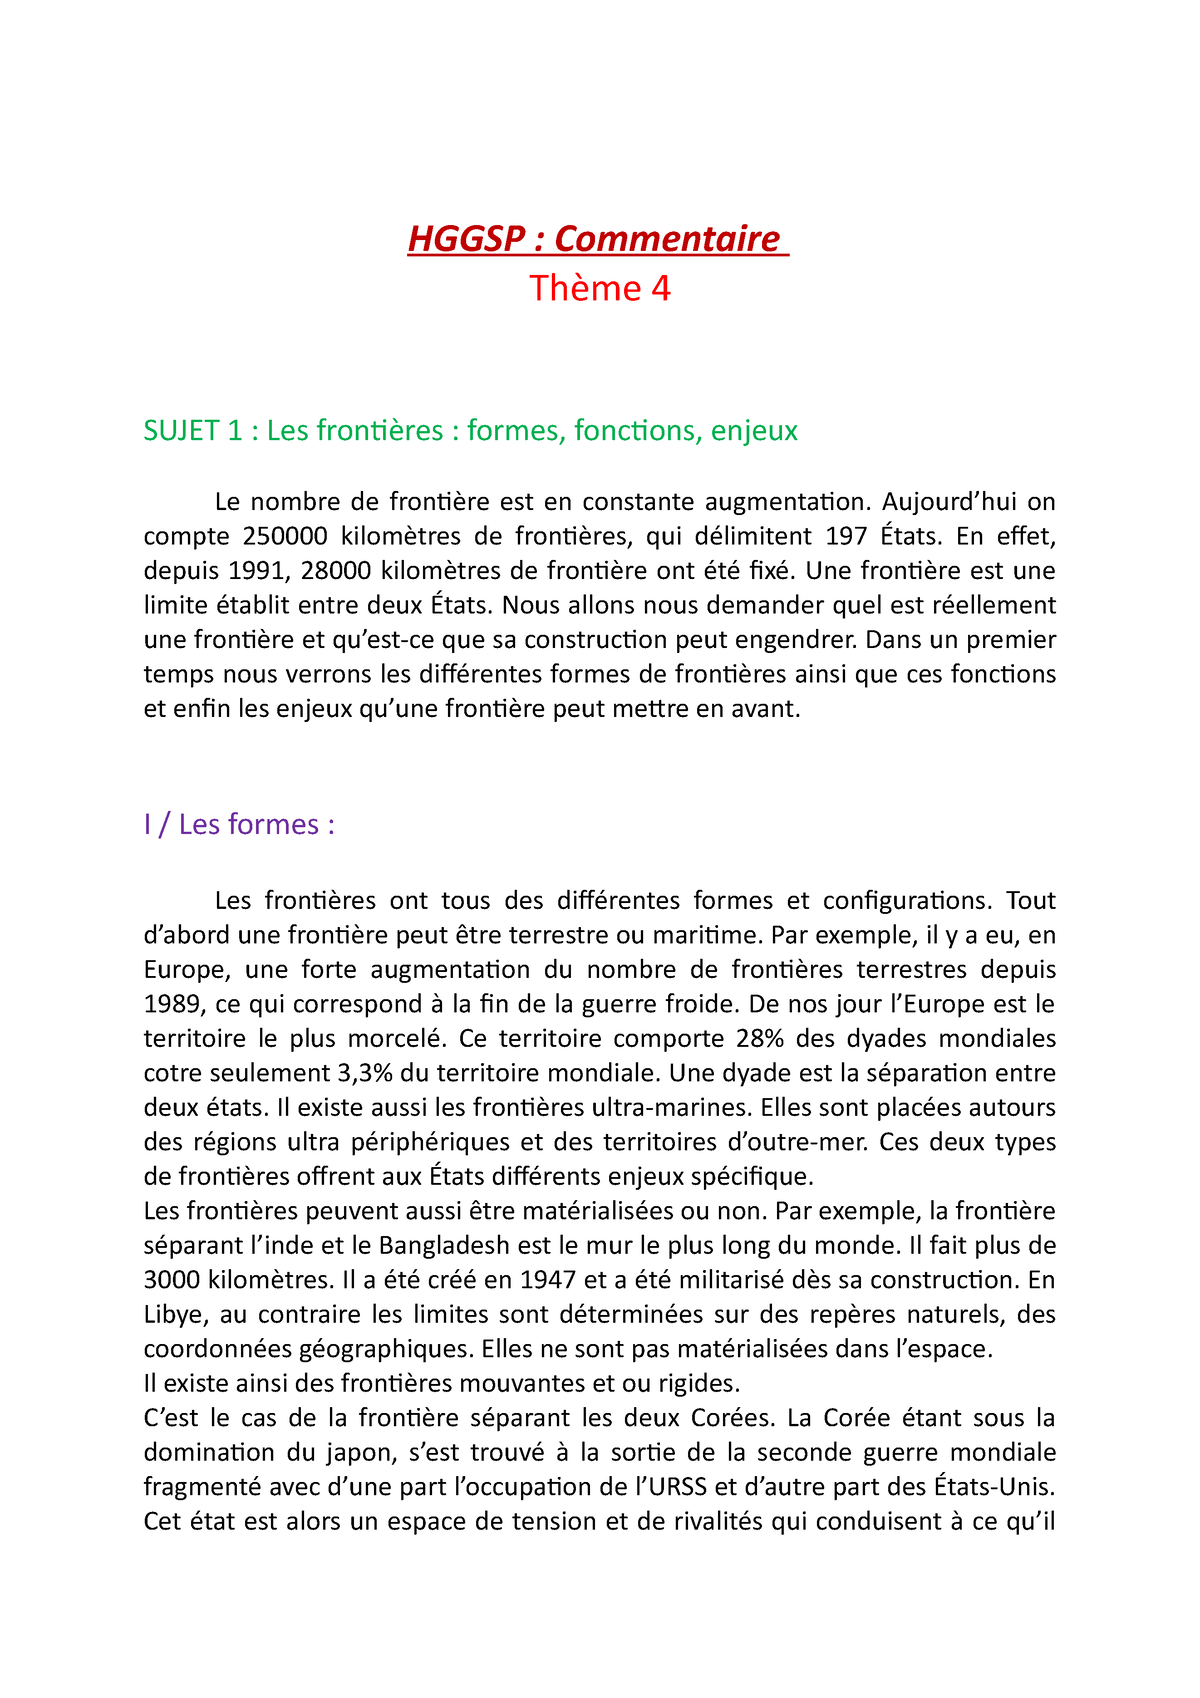 introduction dissertation hggsp exemple